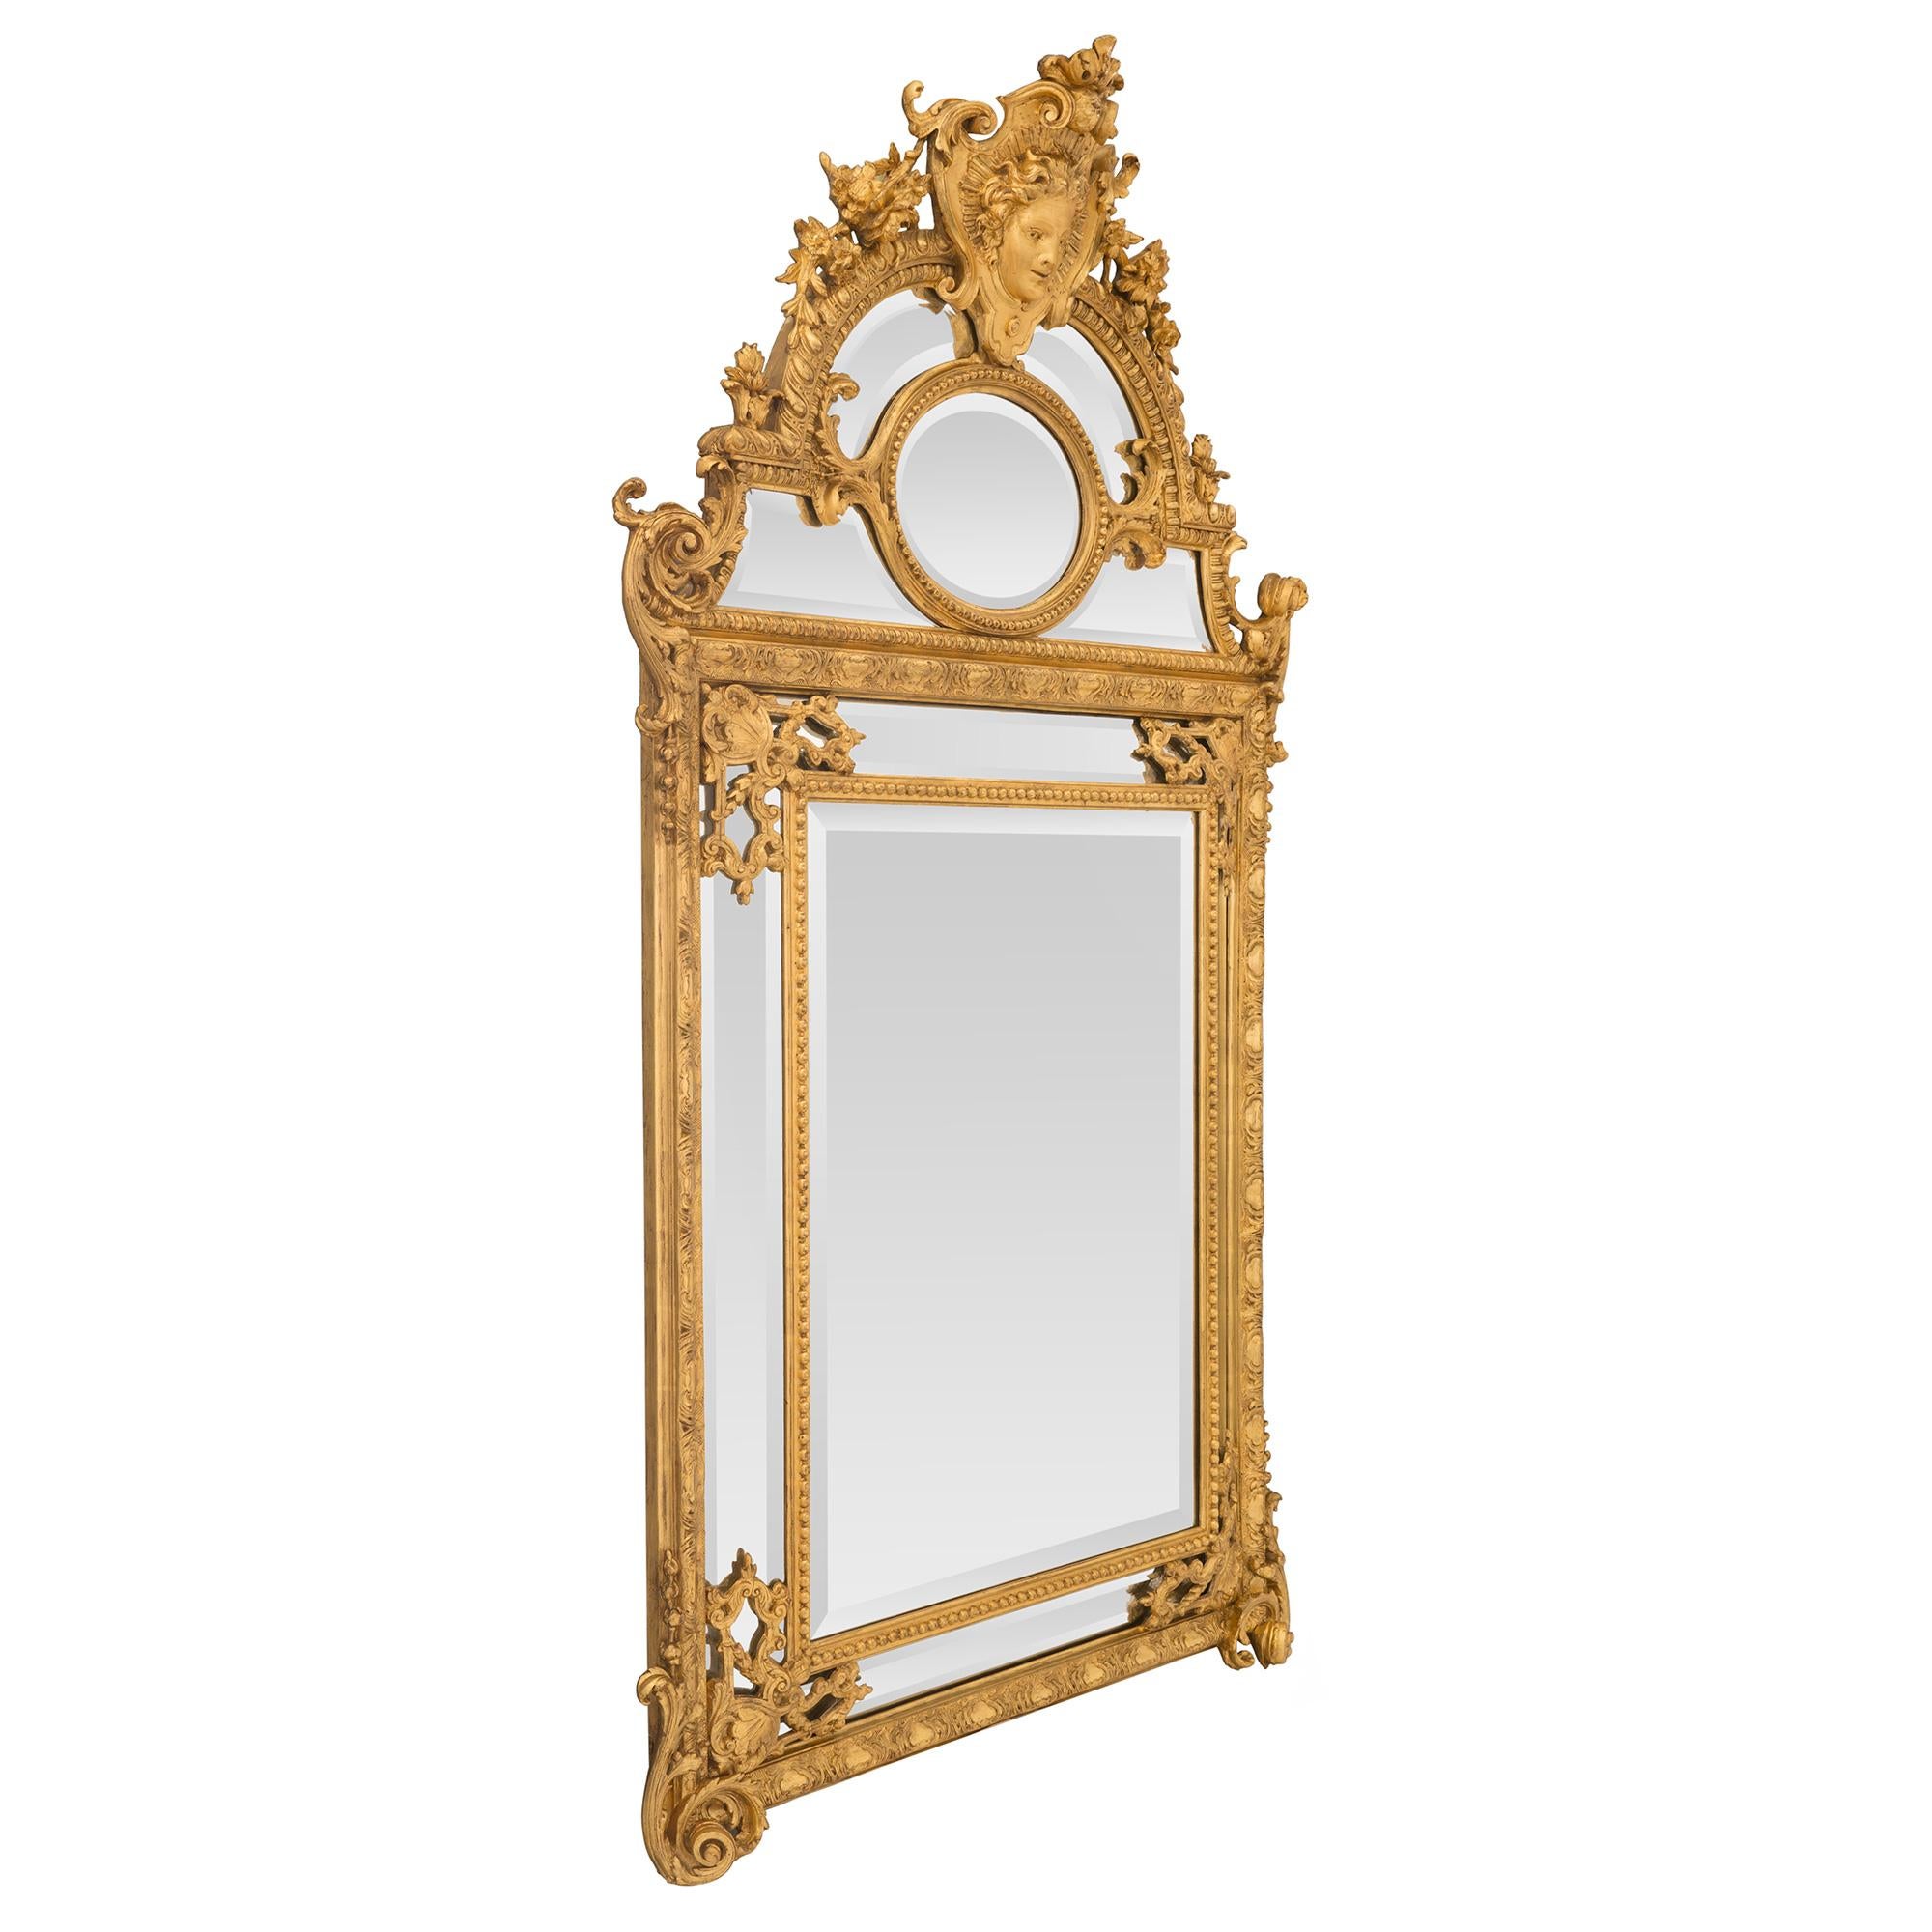 A striking French 19th century Régence st. double framed giltwood mirror. The mirror retains all of its original beveled mirror plates set within a fine beaded band and beautiful carved foliate designed frame. At each corner are impressive pierced